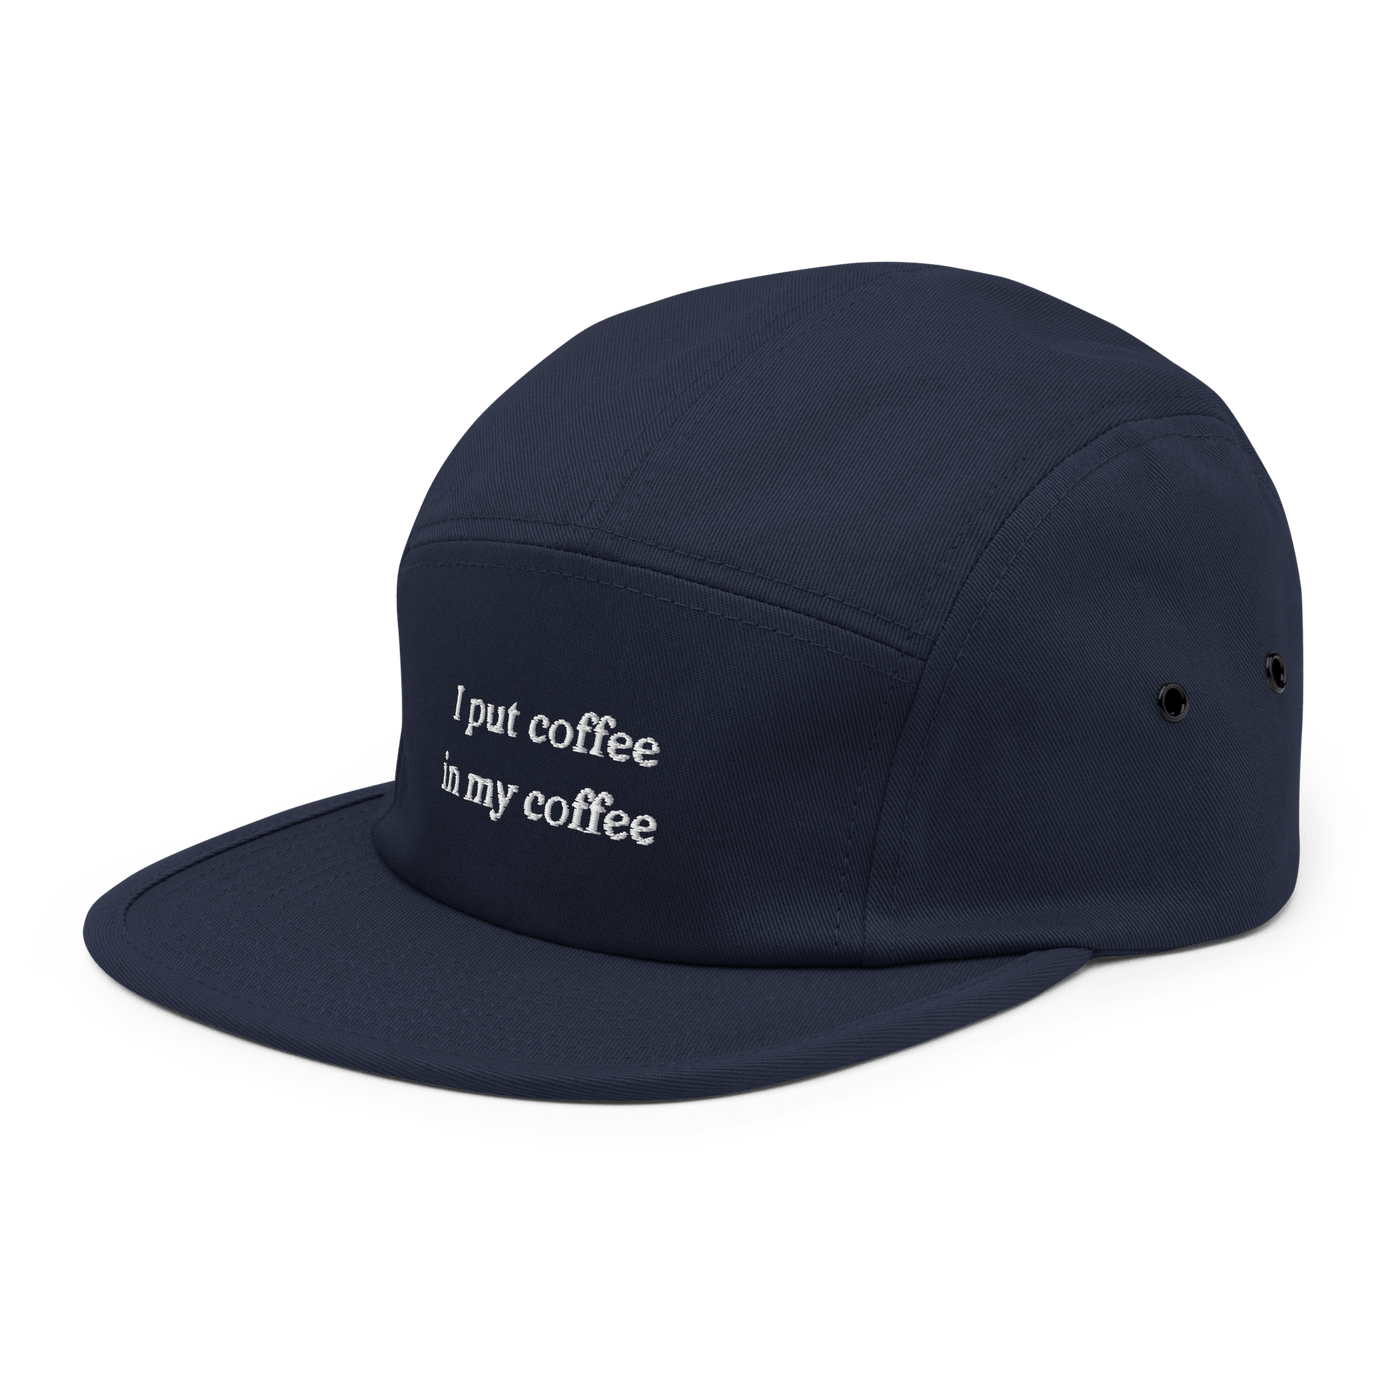 I Put coffee in my coffee Five Panel Cap - Navy - - Just Another Cap Store